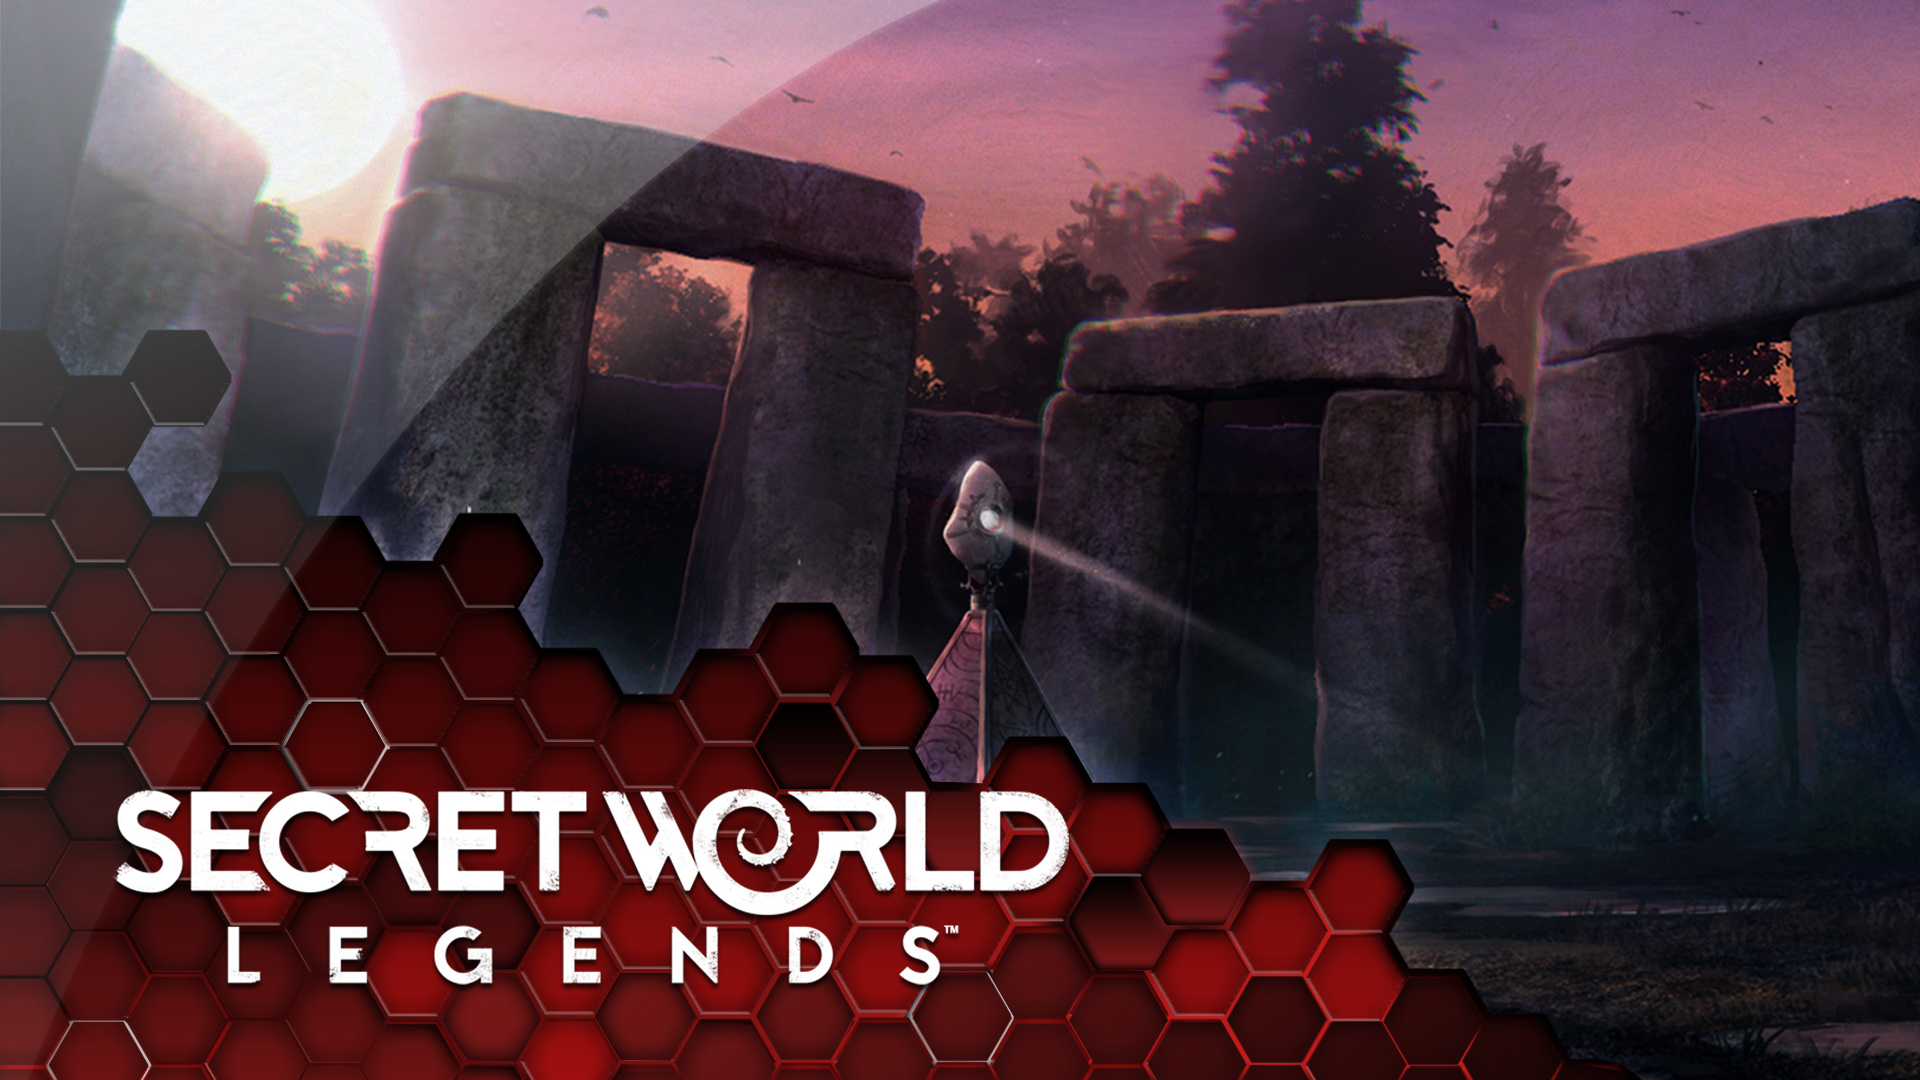 The Secret World PC Download free full game for windows